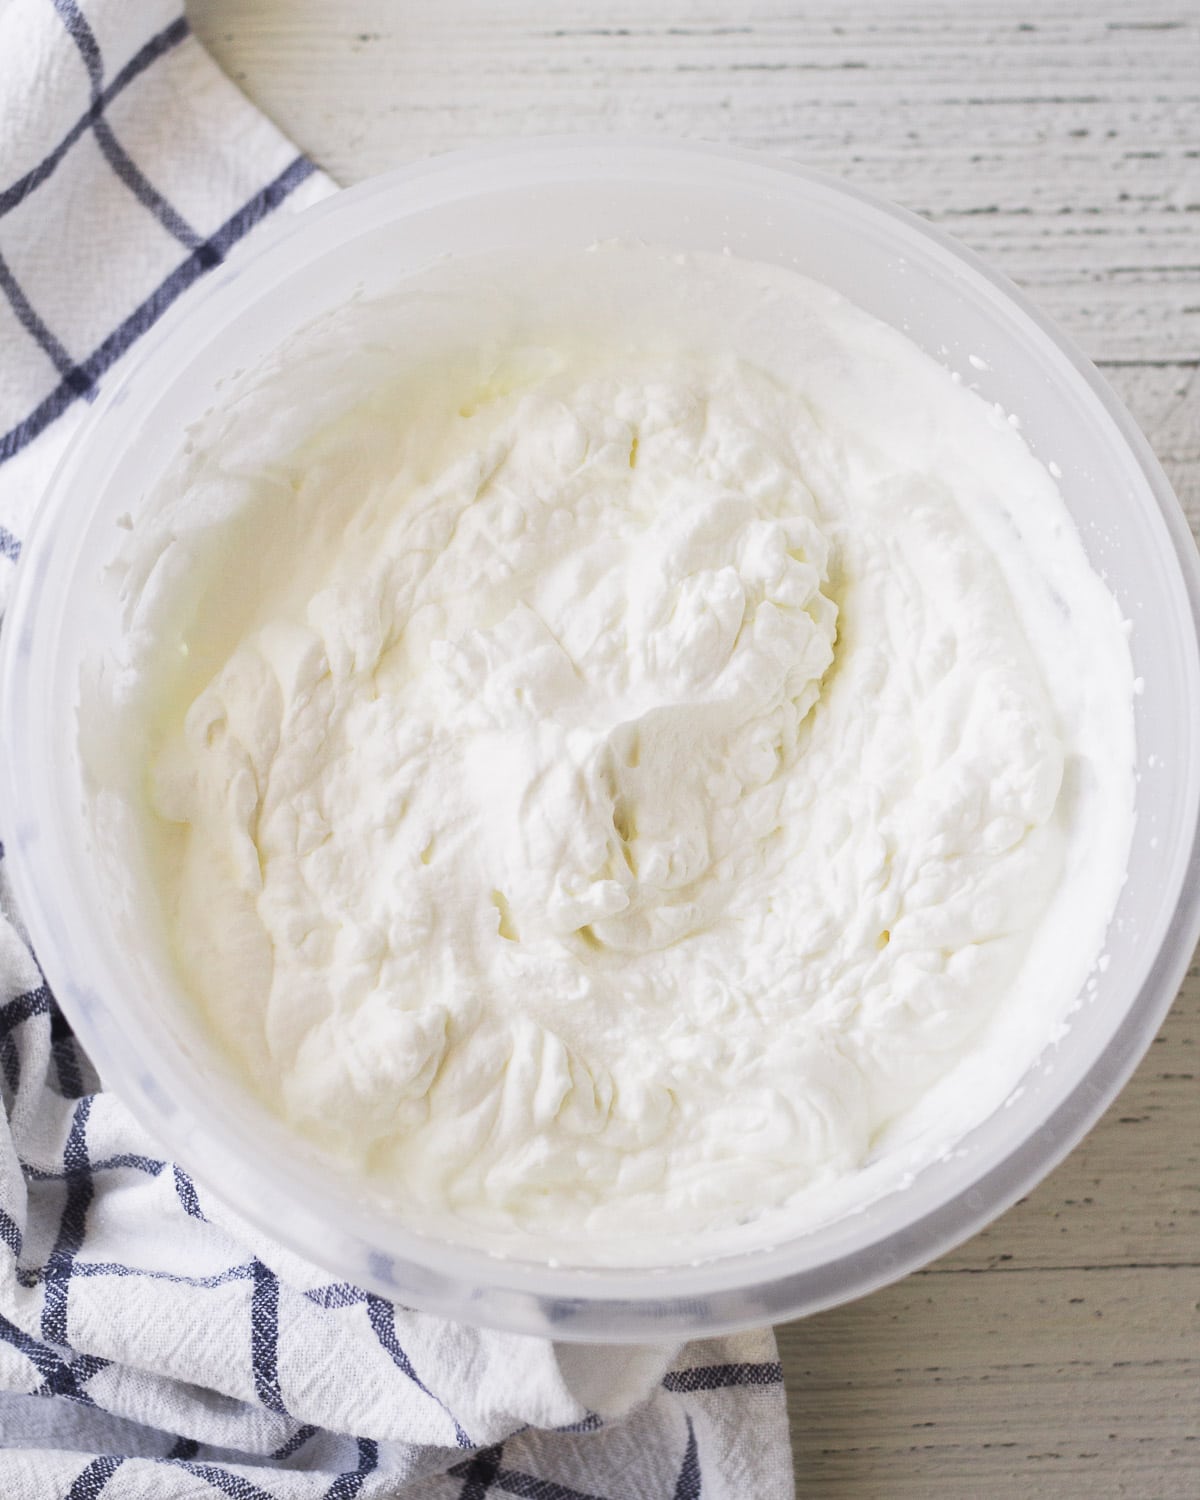 A bowl of whipped cream.